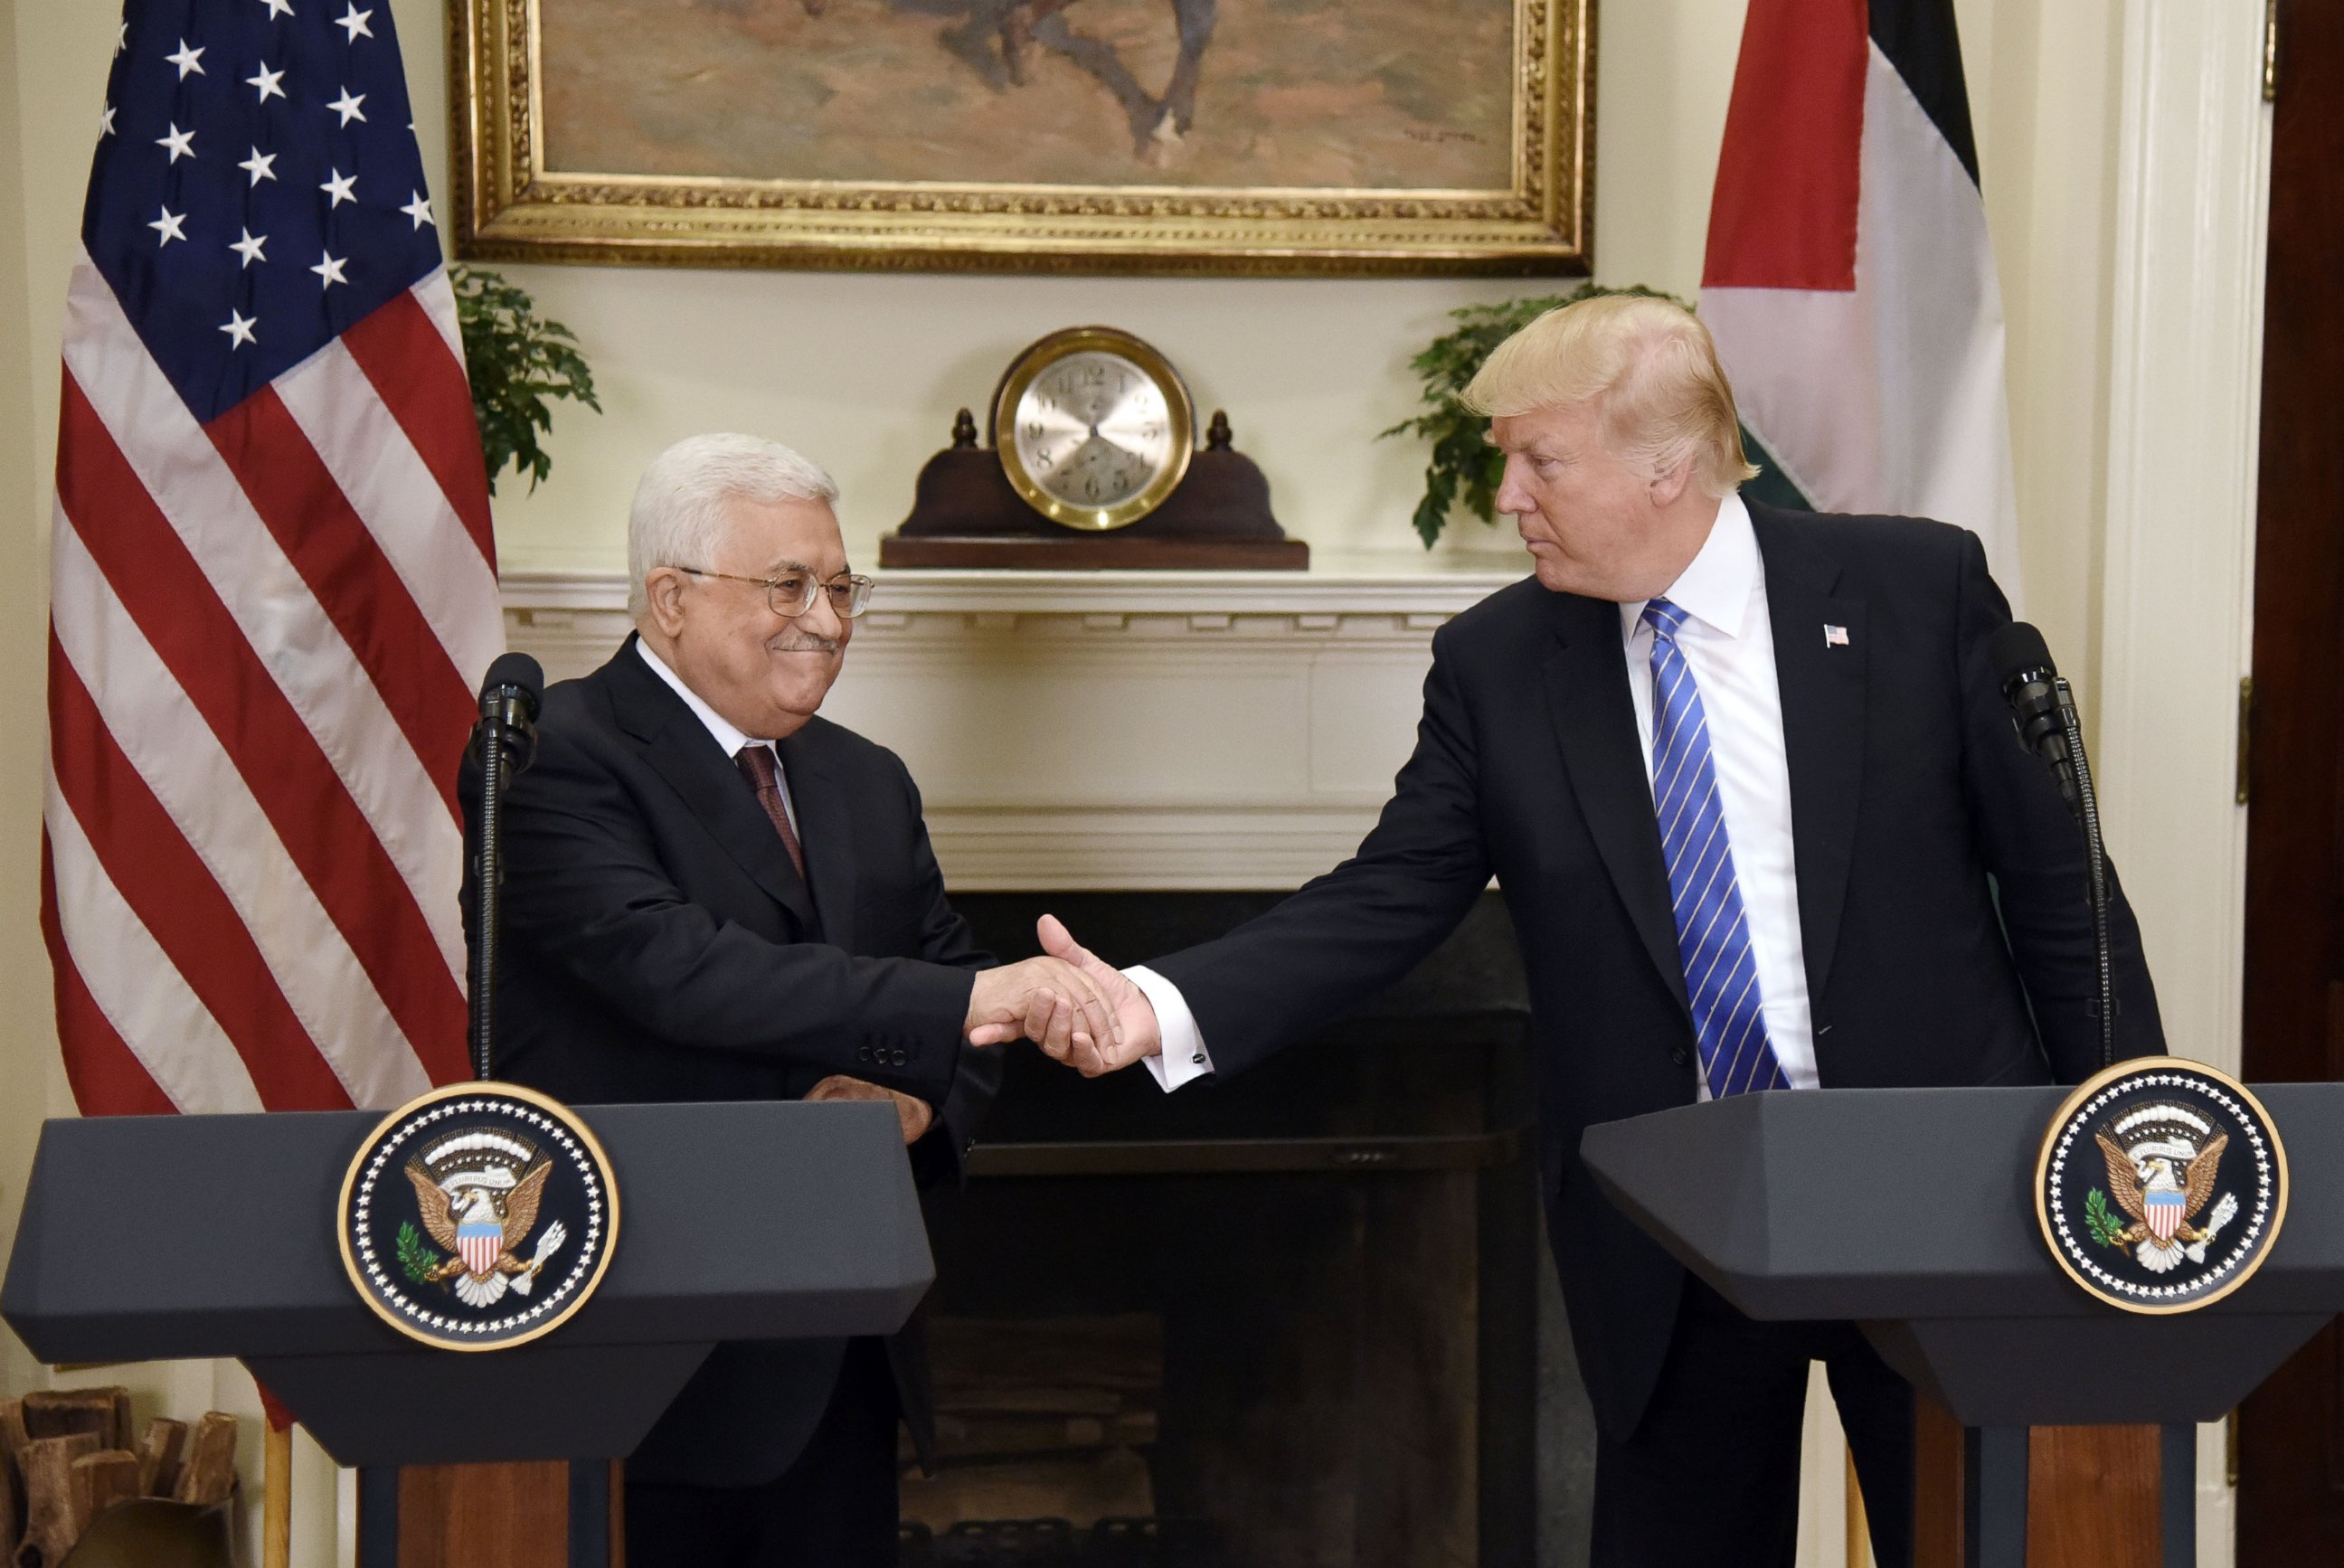 PHOTO: President Donald Trump gives a joint statement with President Mahmoud Abbas of the Palestinian Authority in the Roosevelt Room of the White House, on May 3, 2017, in Washington.